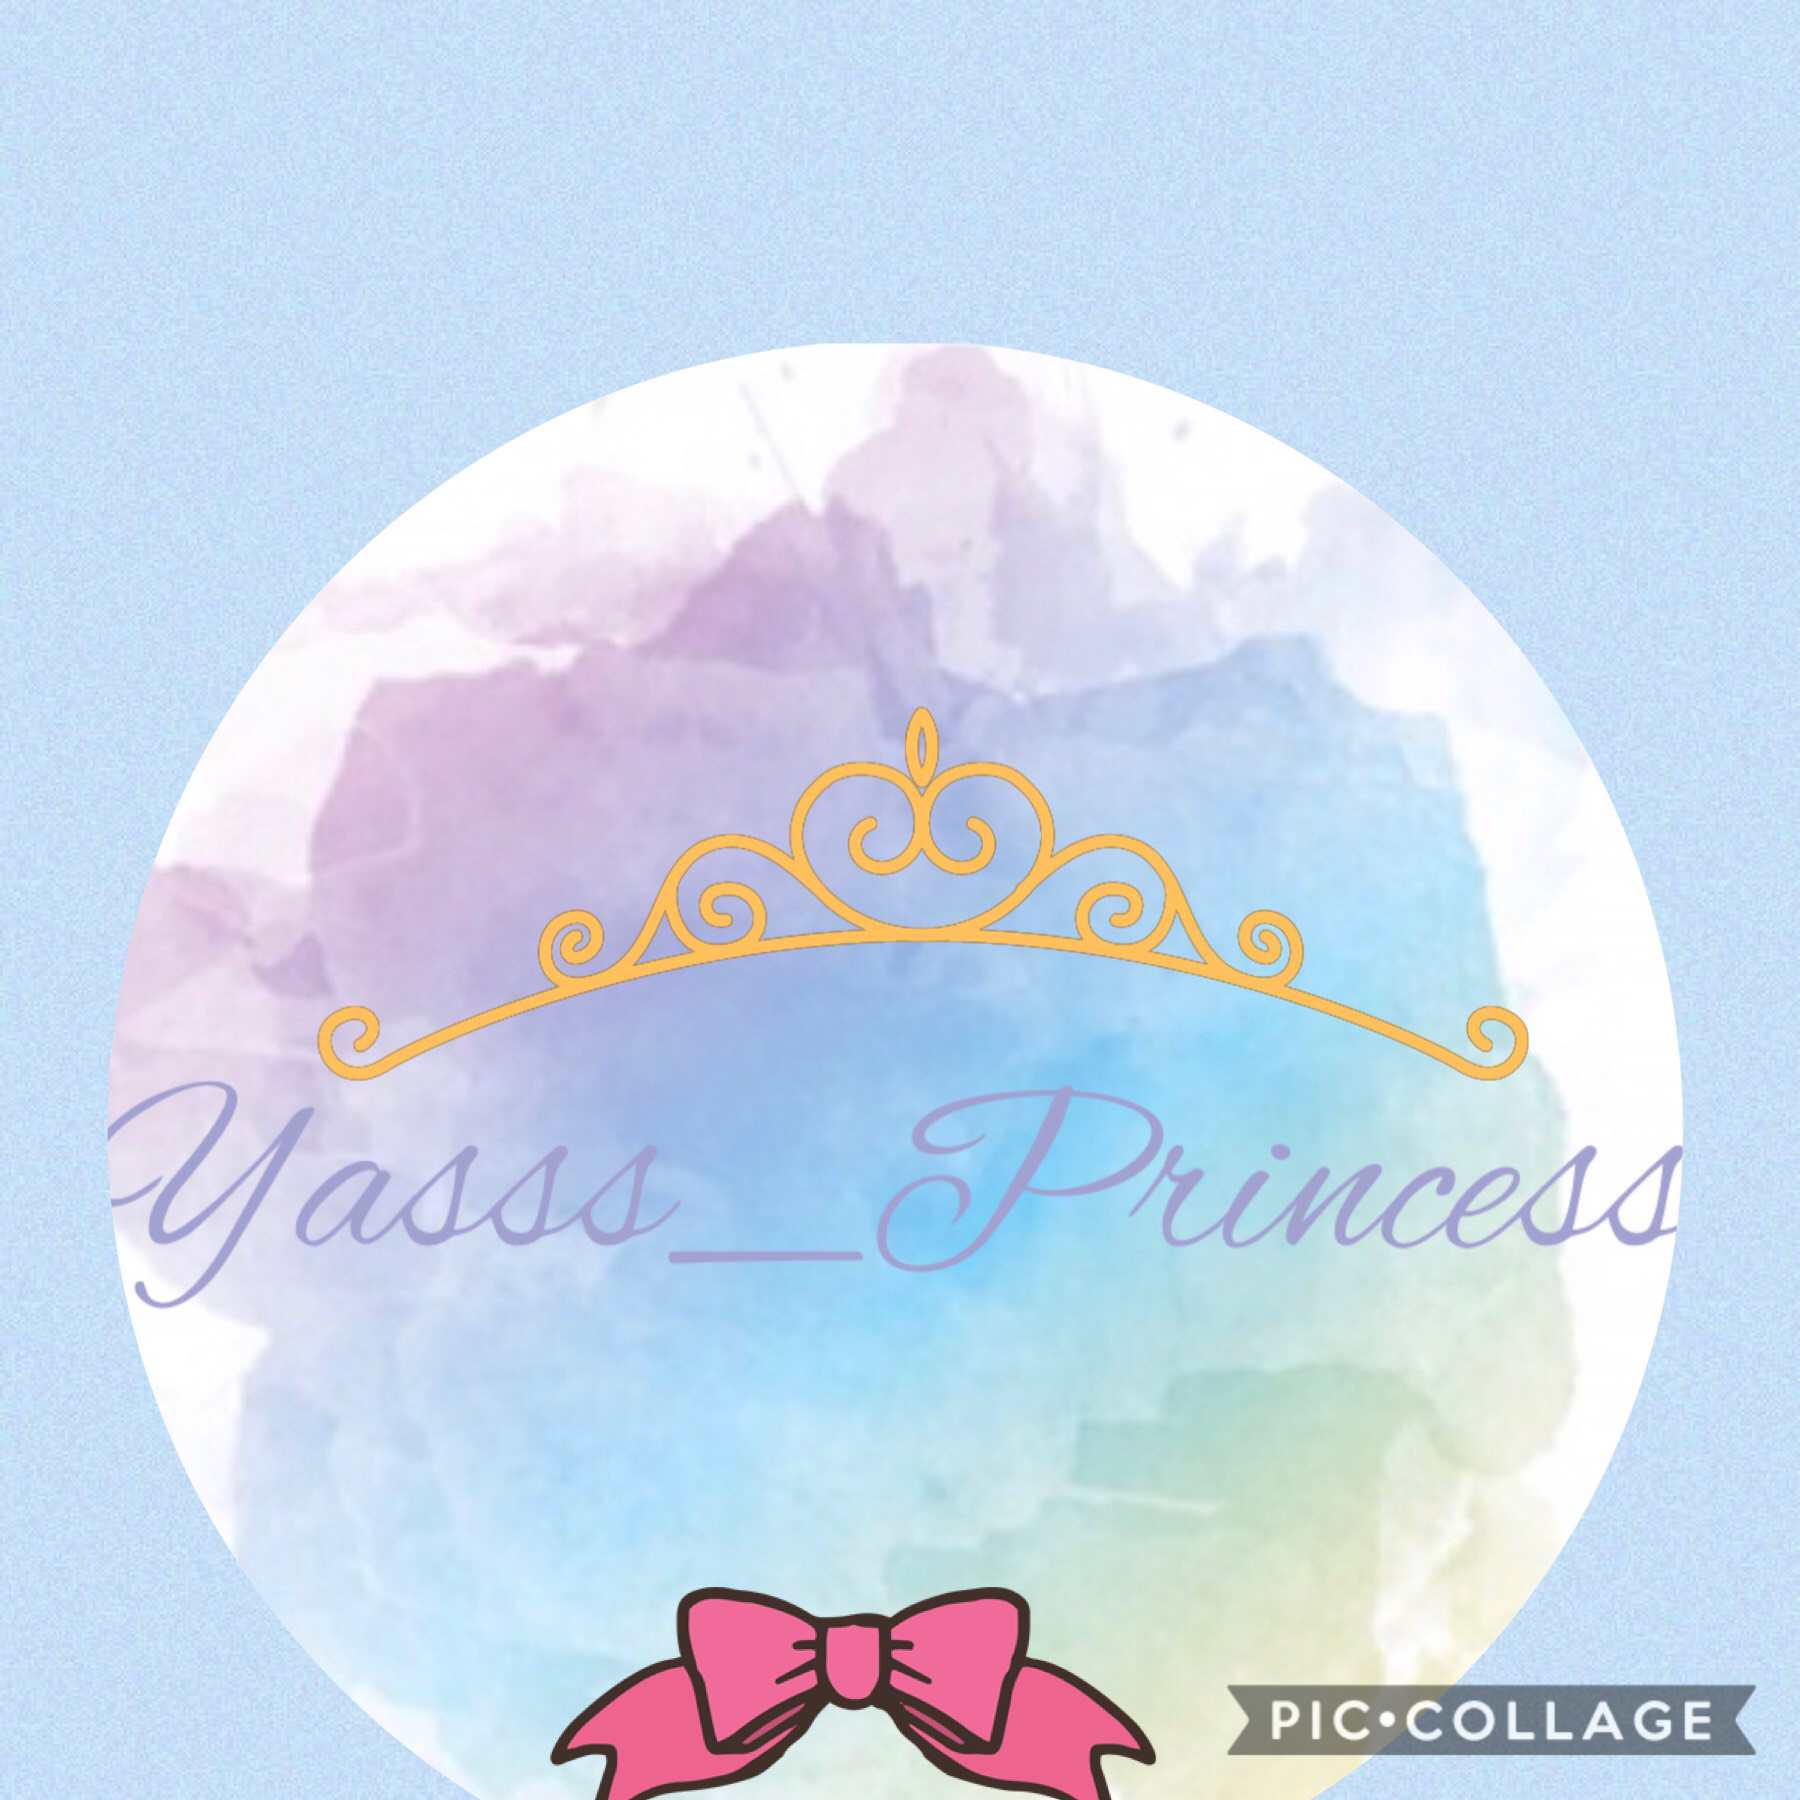 Another logo made by yours truly 😘 💖